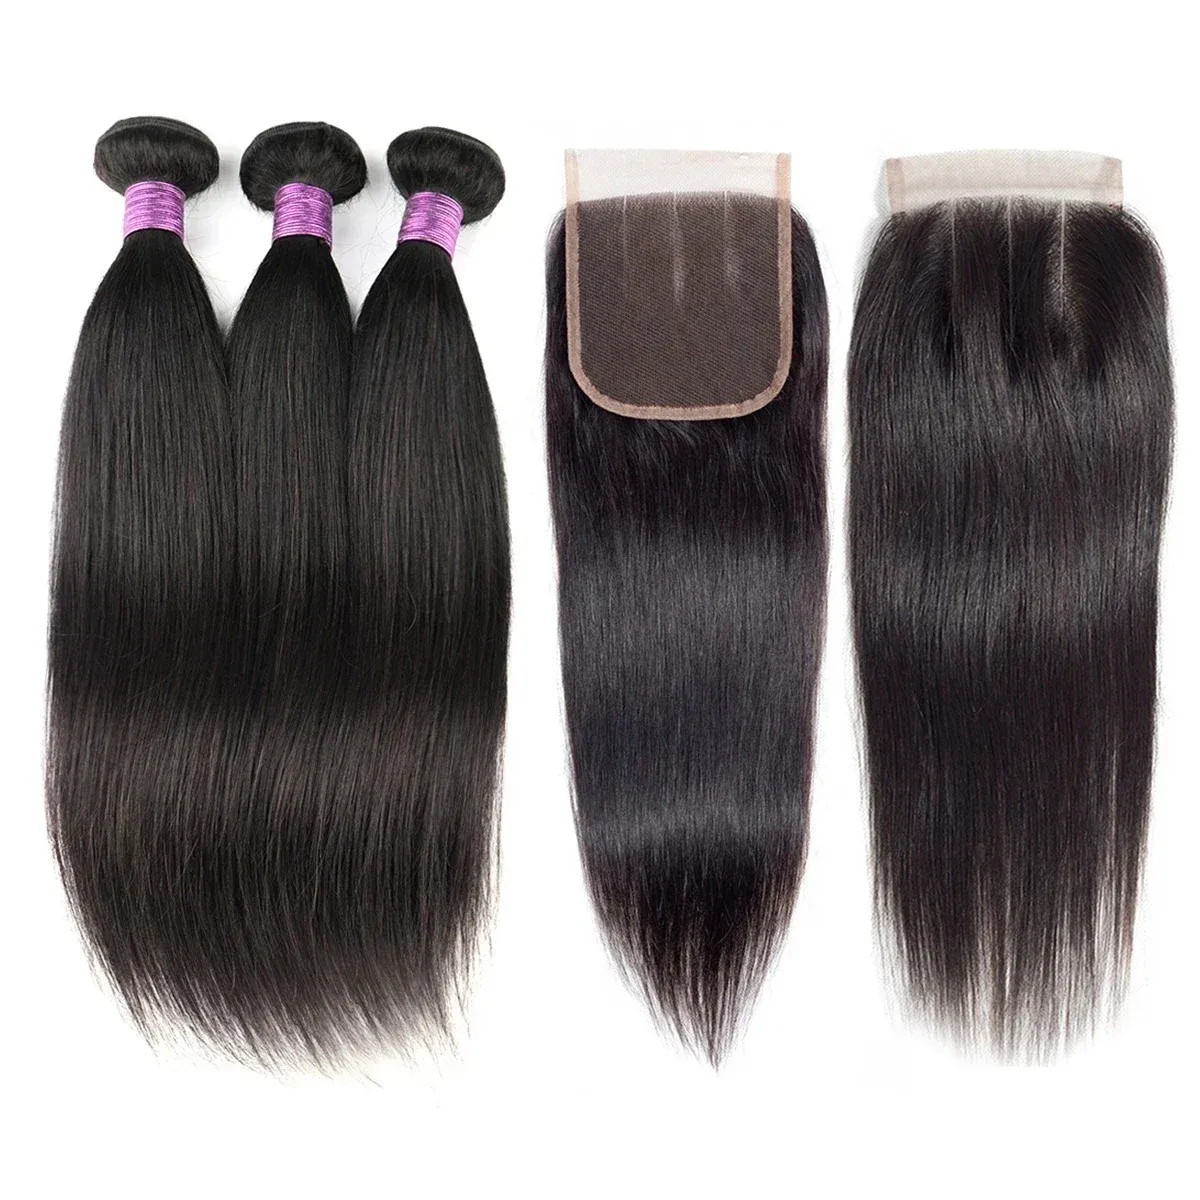 Closure Brazilian Virgin Natural Hair Straight Bundles Weaves 4x4 Lace Closure Straight Human Hair 3 Bundles with Closure Fast Delivery